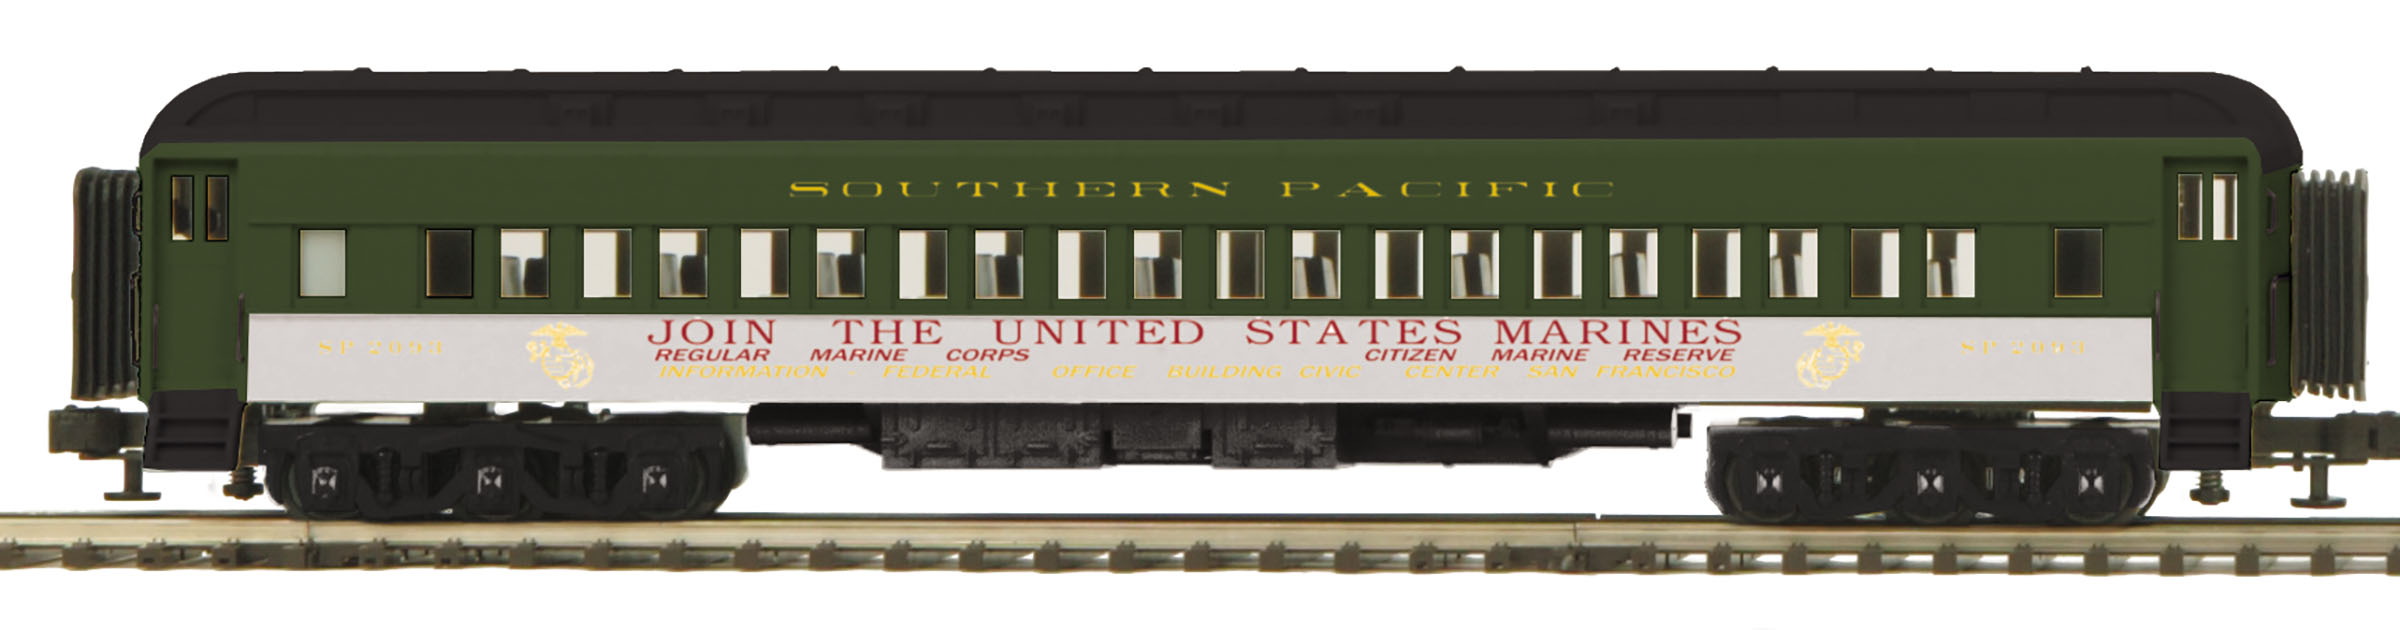 Southern Pacific 70' Madison Coach Car (Buy War Bonds – Marines) image